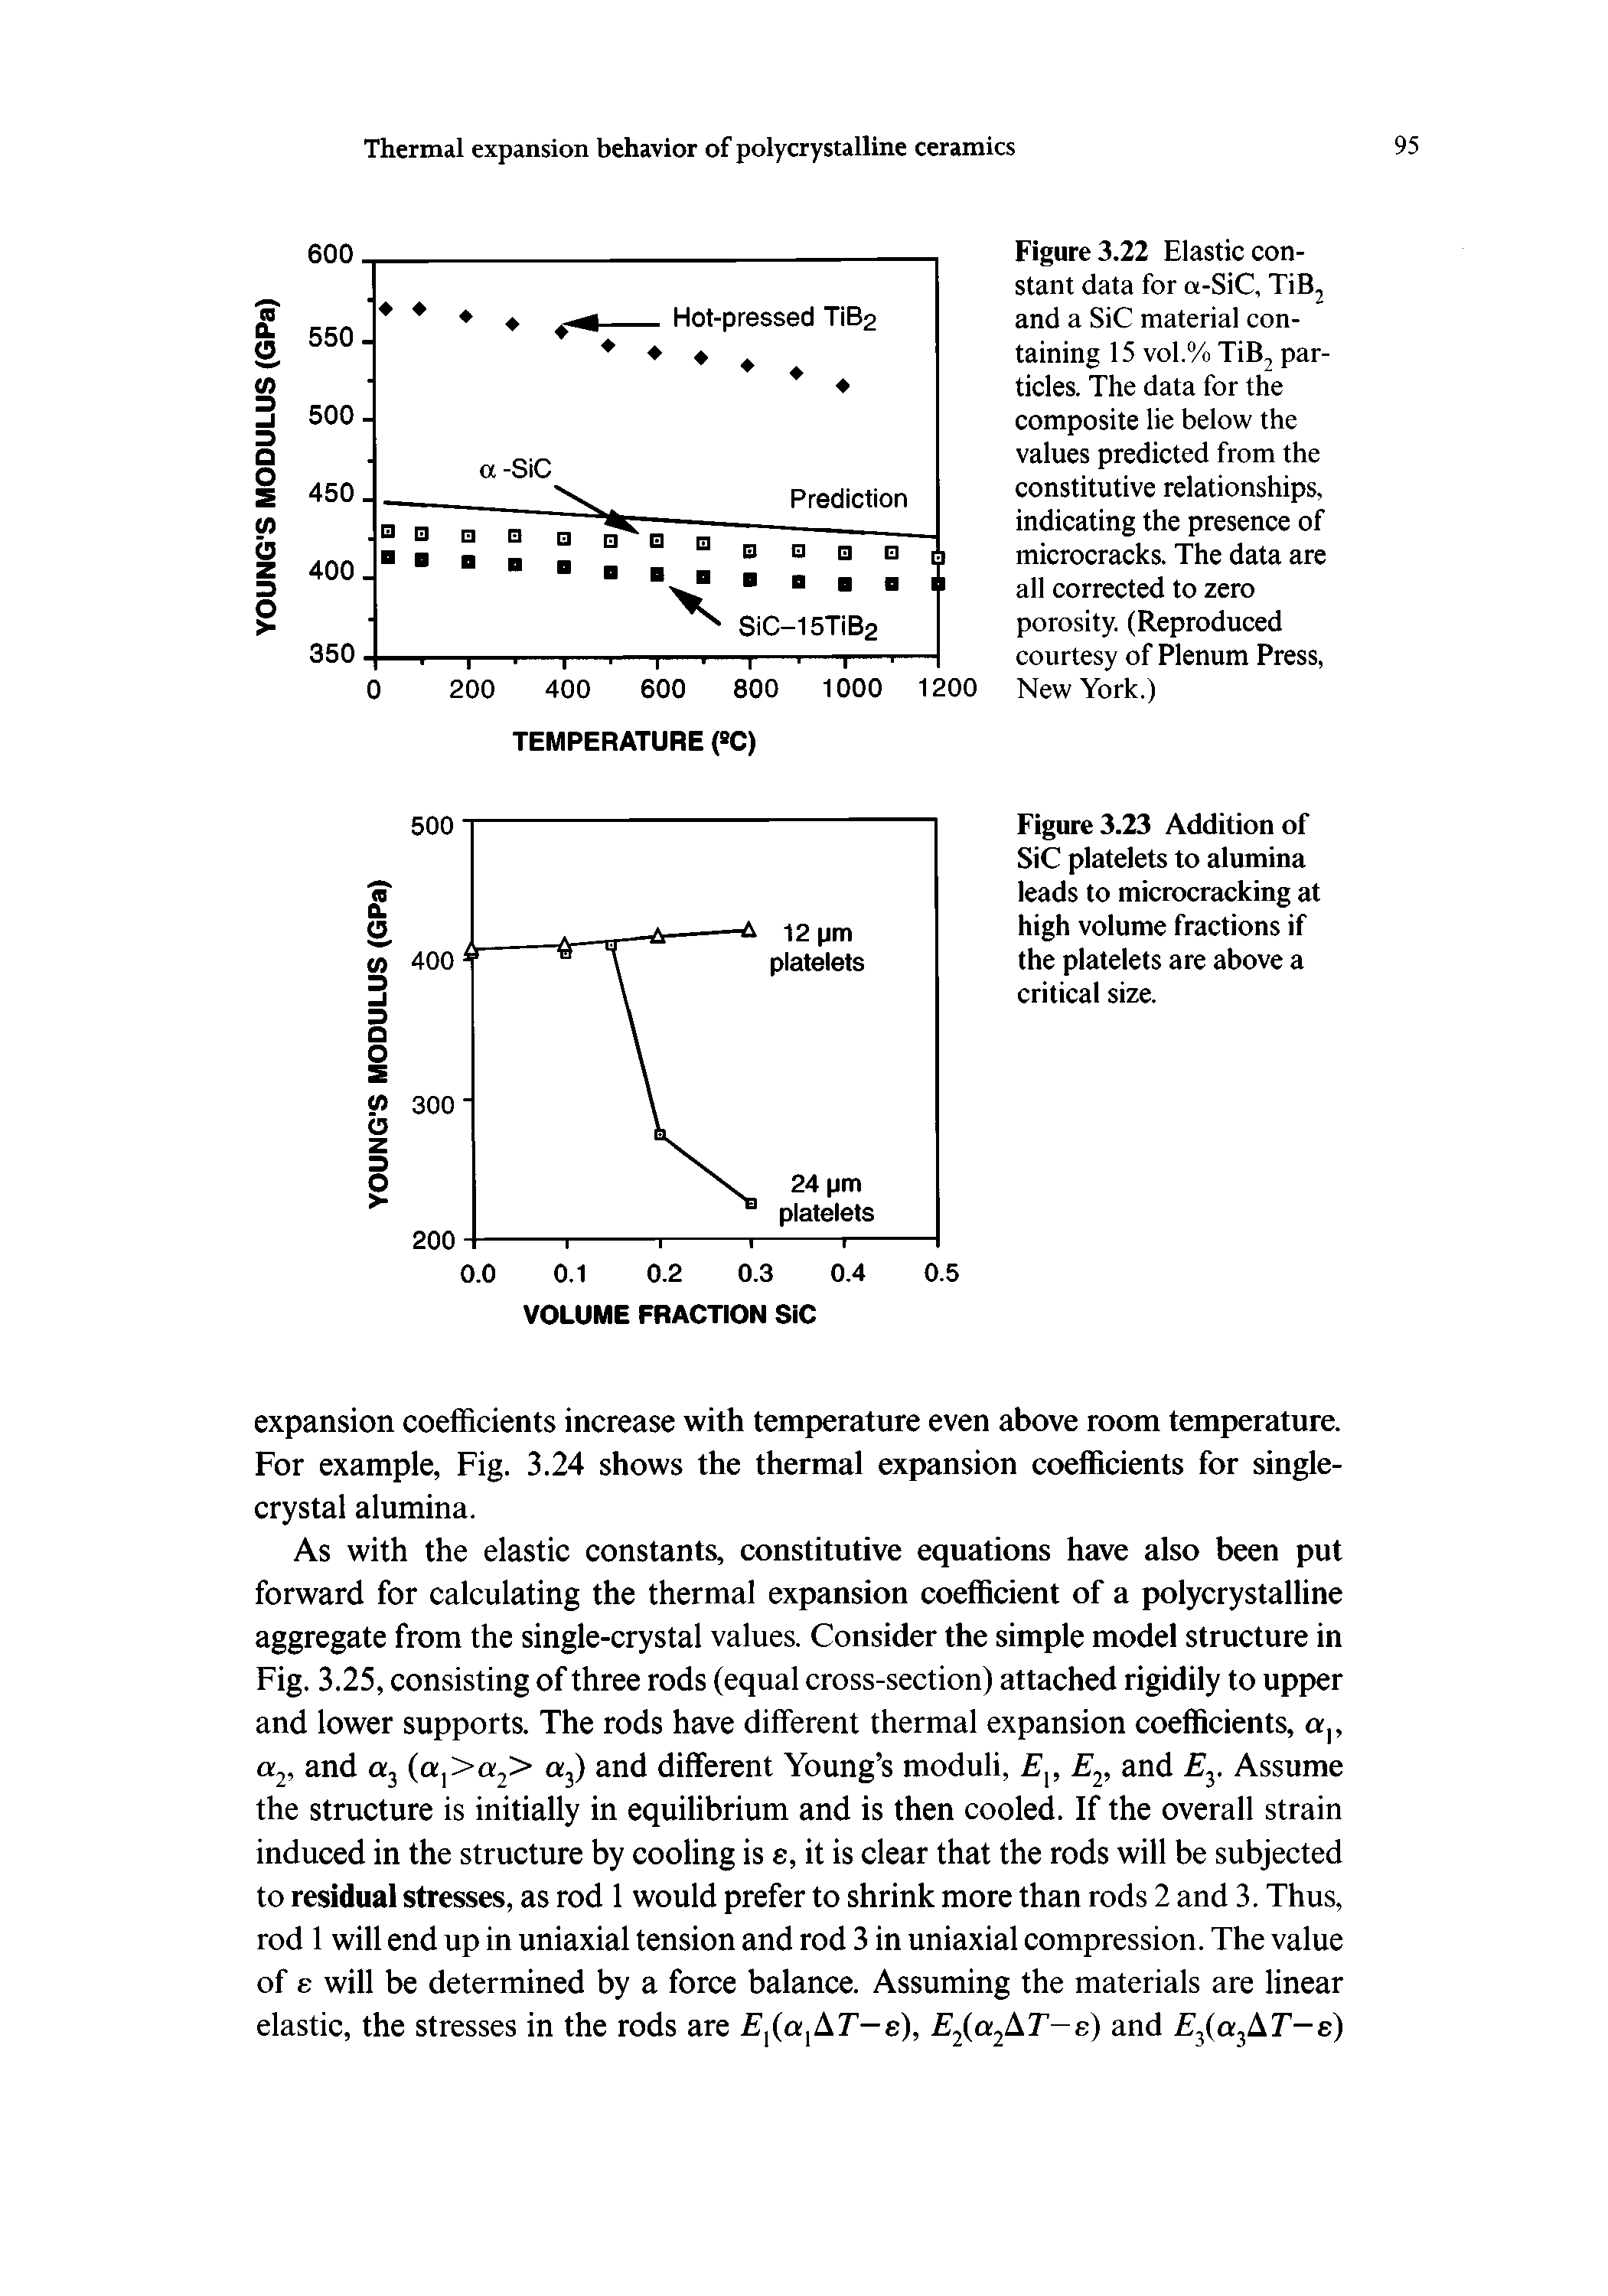 Figure 3.22 Elastic constant data for a-SiC, TiBj and a SiC material containing 15 vol.% TiB2 particles. The data for the composite lie below the values predicted from the constitutive relationships, indicating the presence of microcracks. The data are all corrected to zero porosity. (Reproduced courtesy of Plenum Press, New York.)...